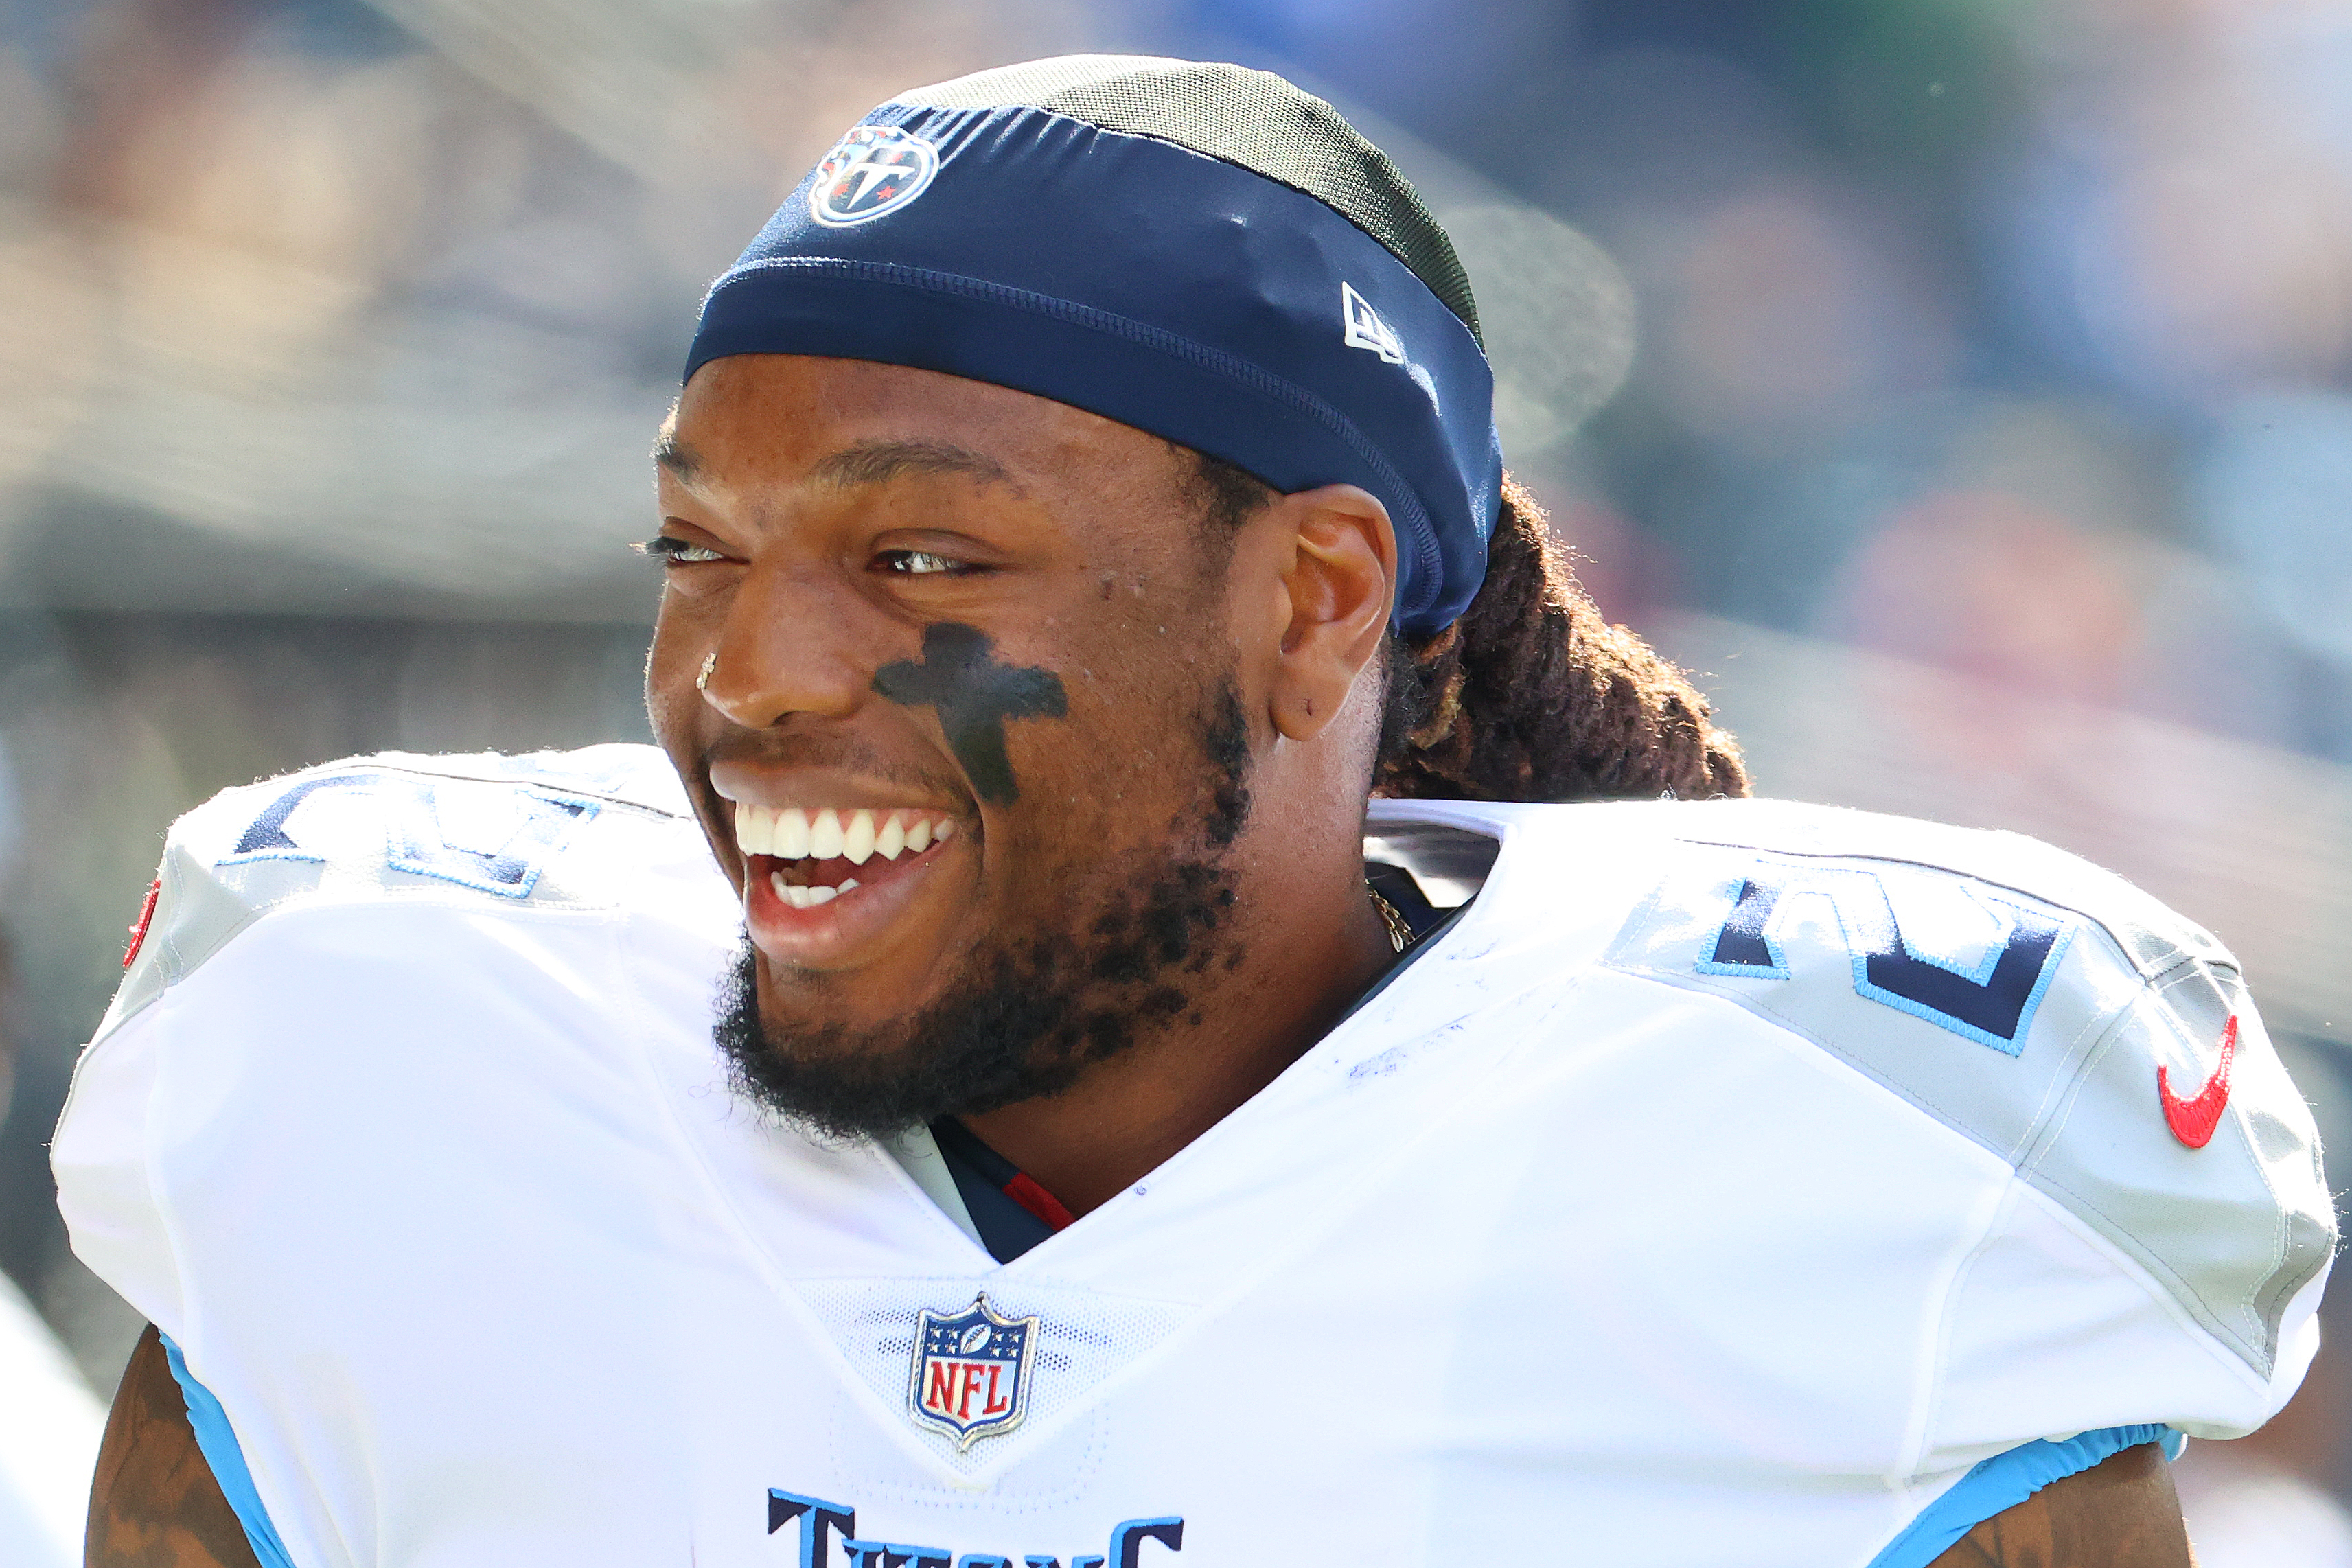 Titans running back Henry reacts during NFL game